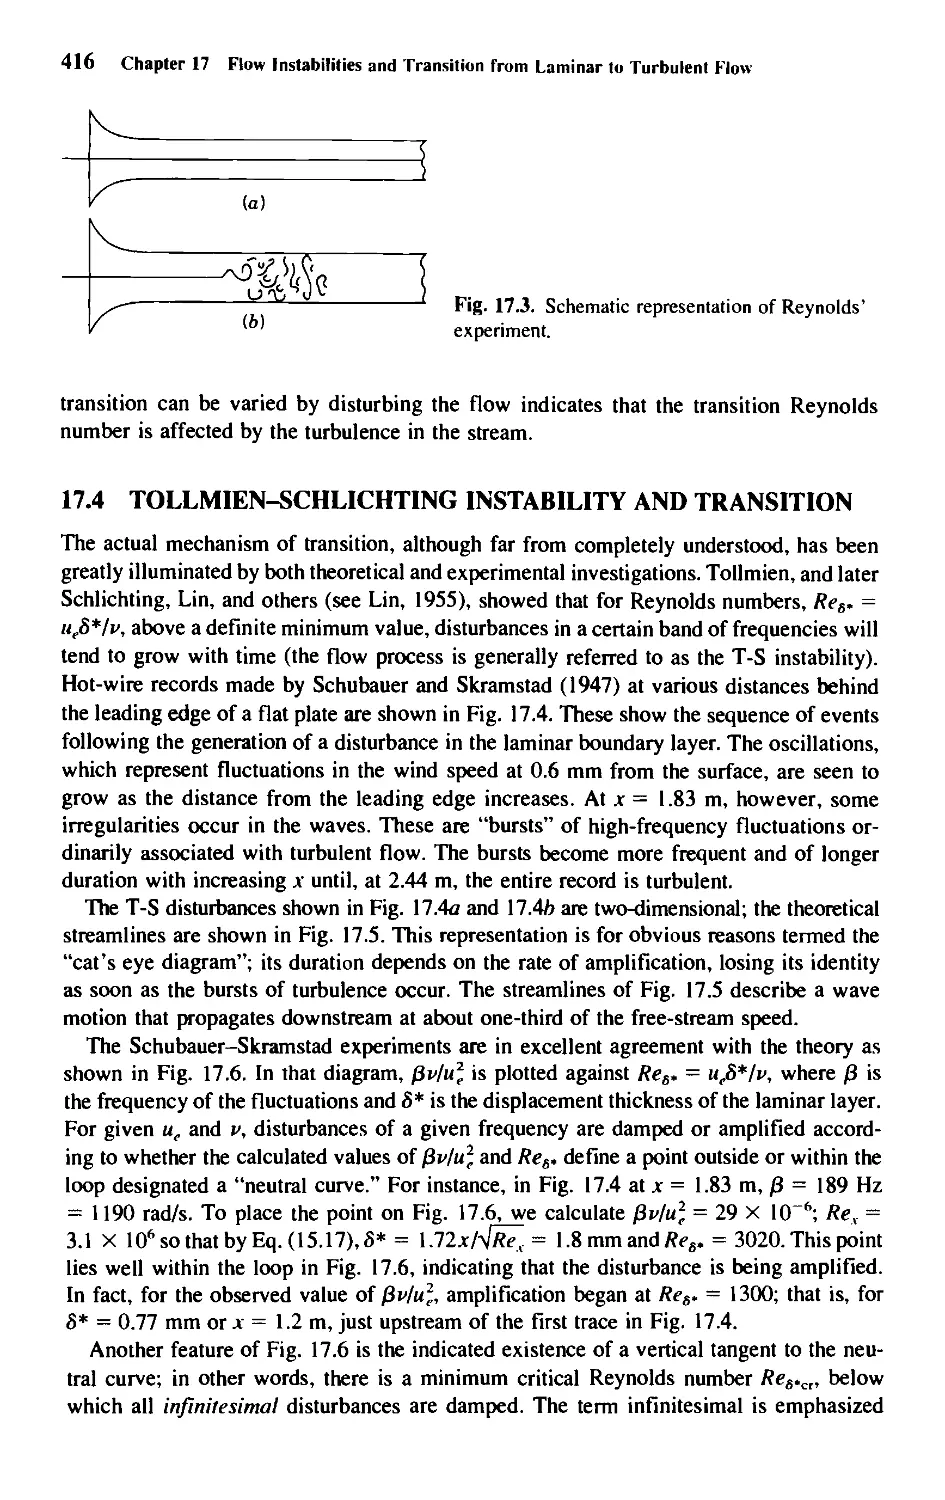 17.4 - Tollmien-Schlichting Instability and Transition